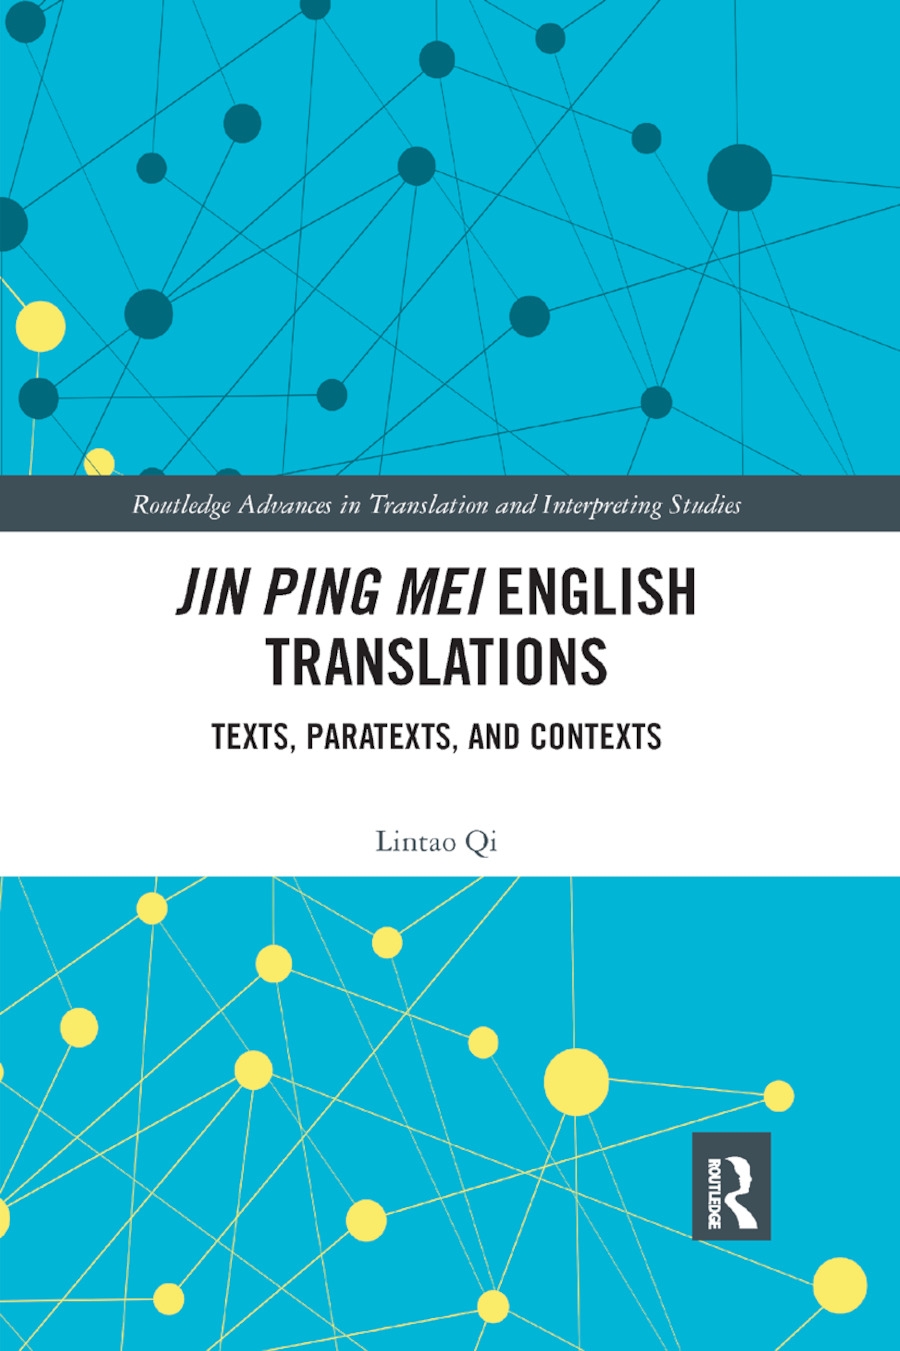 Jin Ping Mei English Translations: Texts, Paratexts and Contexts